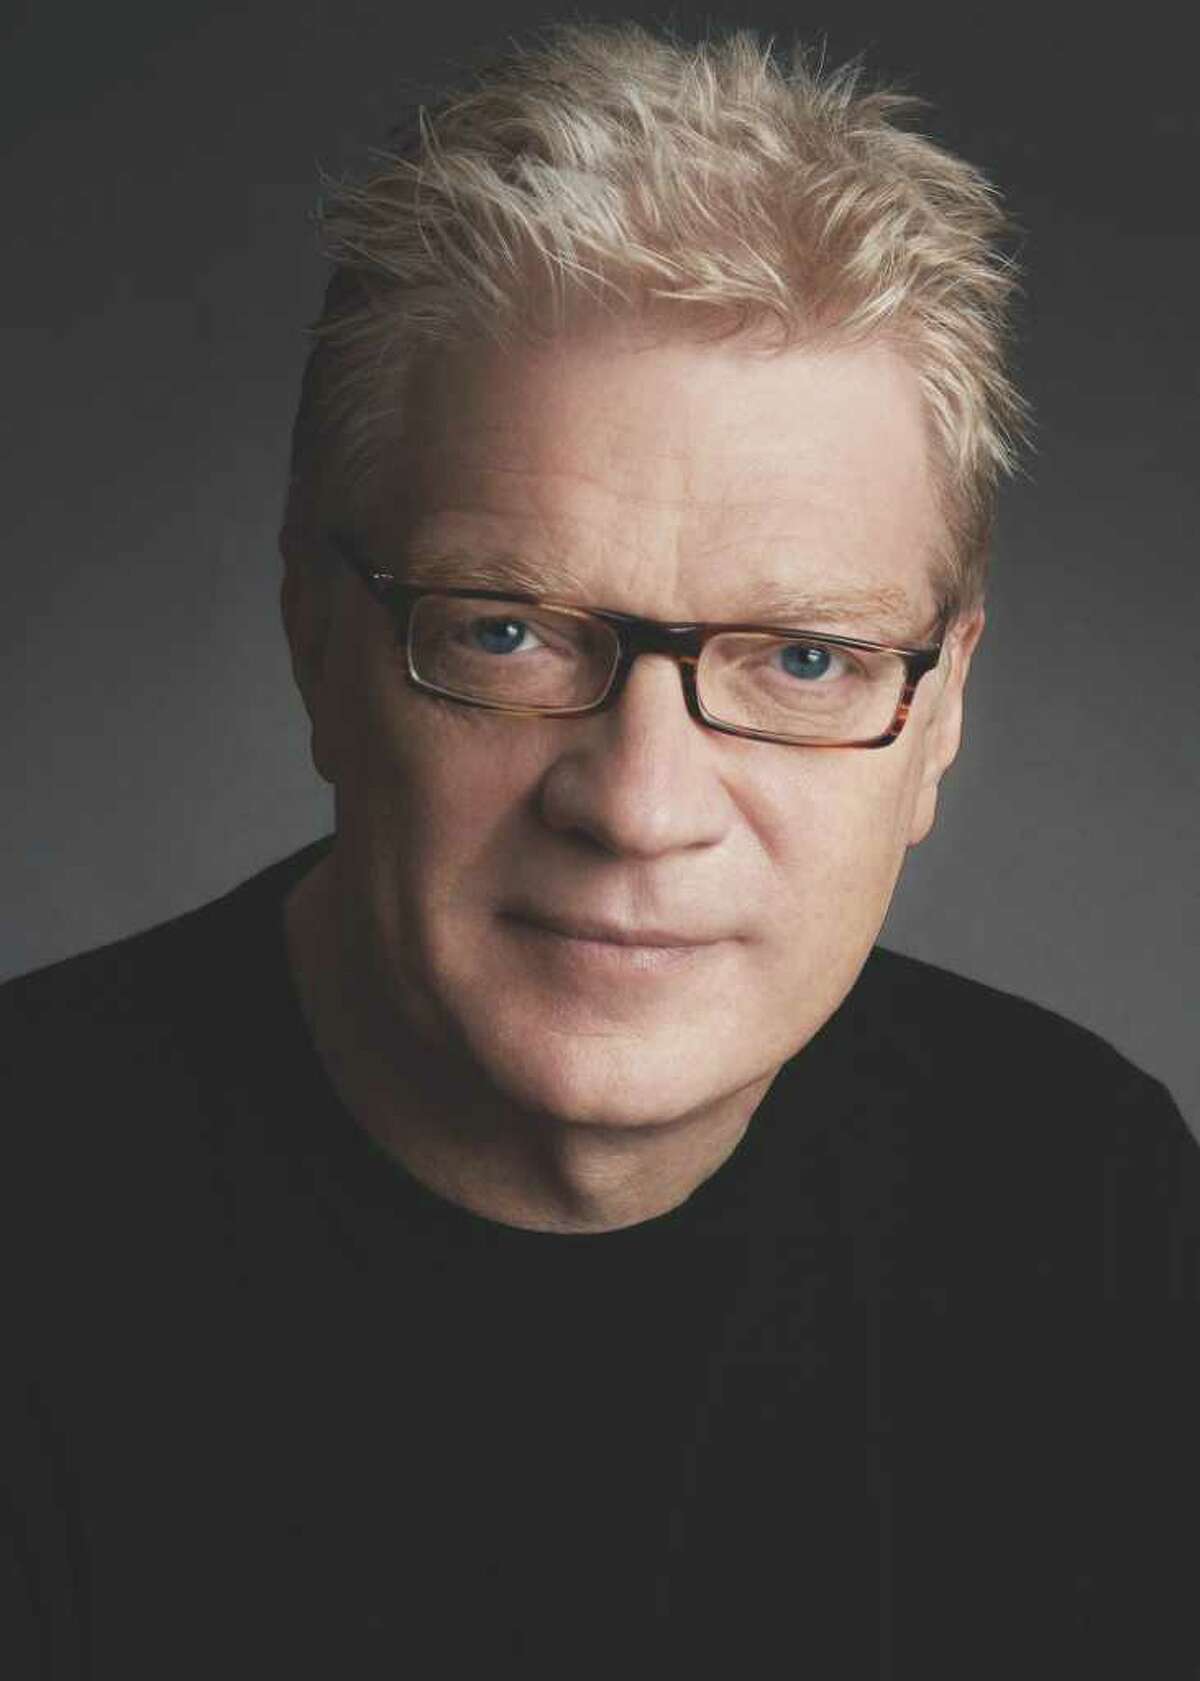 Sir Ken Robinson, educator, author and consultant, says we have to stop disrespecting teachers. He asks, "Could you run a good restaurant while humiliating the chef?"